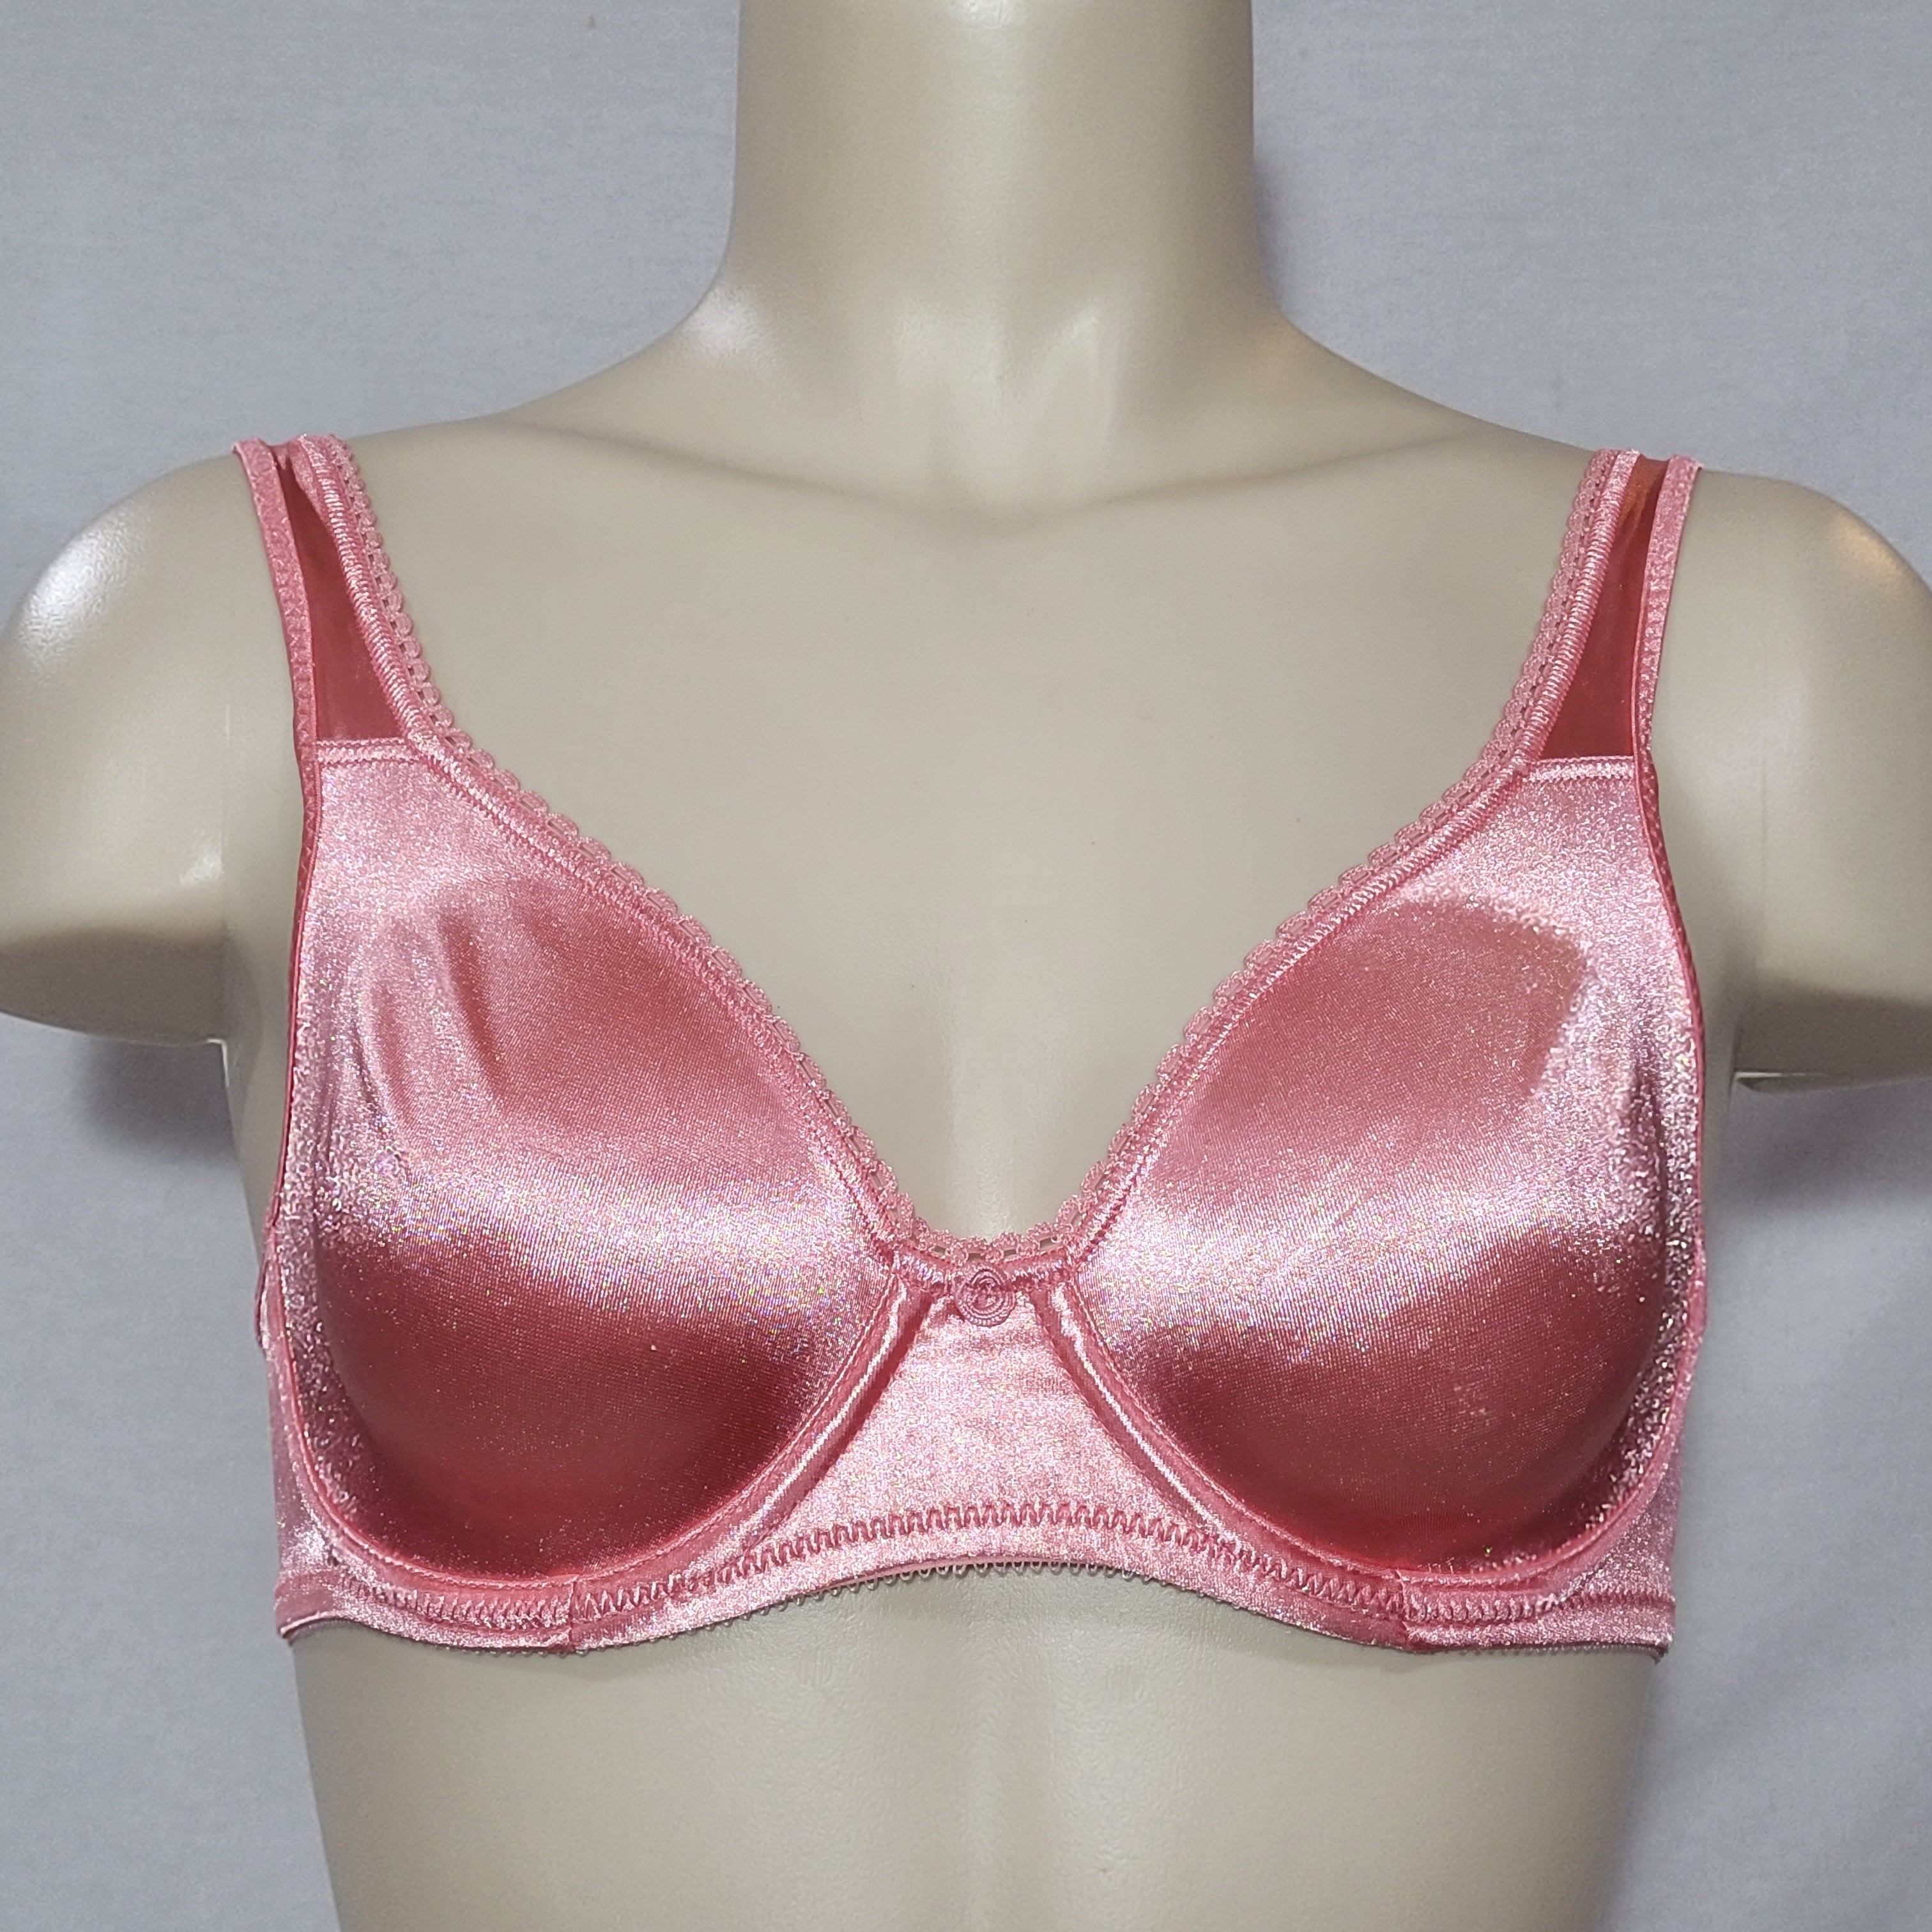 Bali Women's Beauty Lift™ Uplifting Support Underwire Bra Bra, hush  pink/vintage pink, 34B : Buy Online at Best Price in KSA - Souq is now  : Fashion